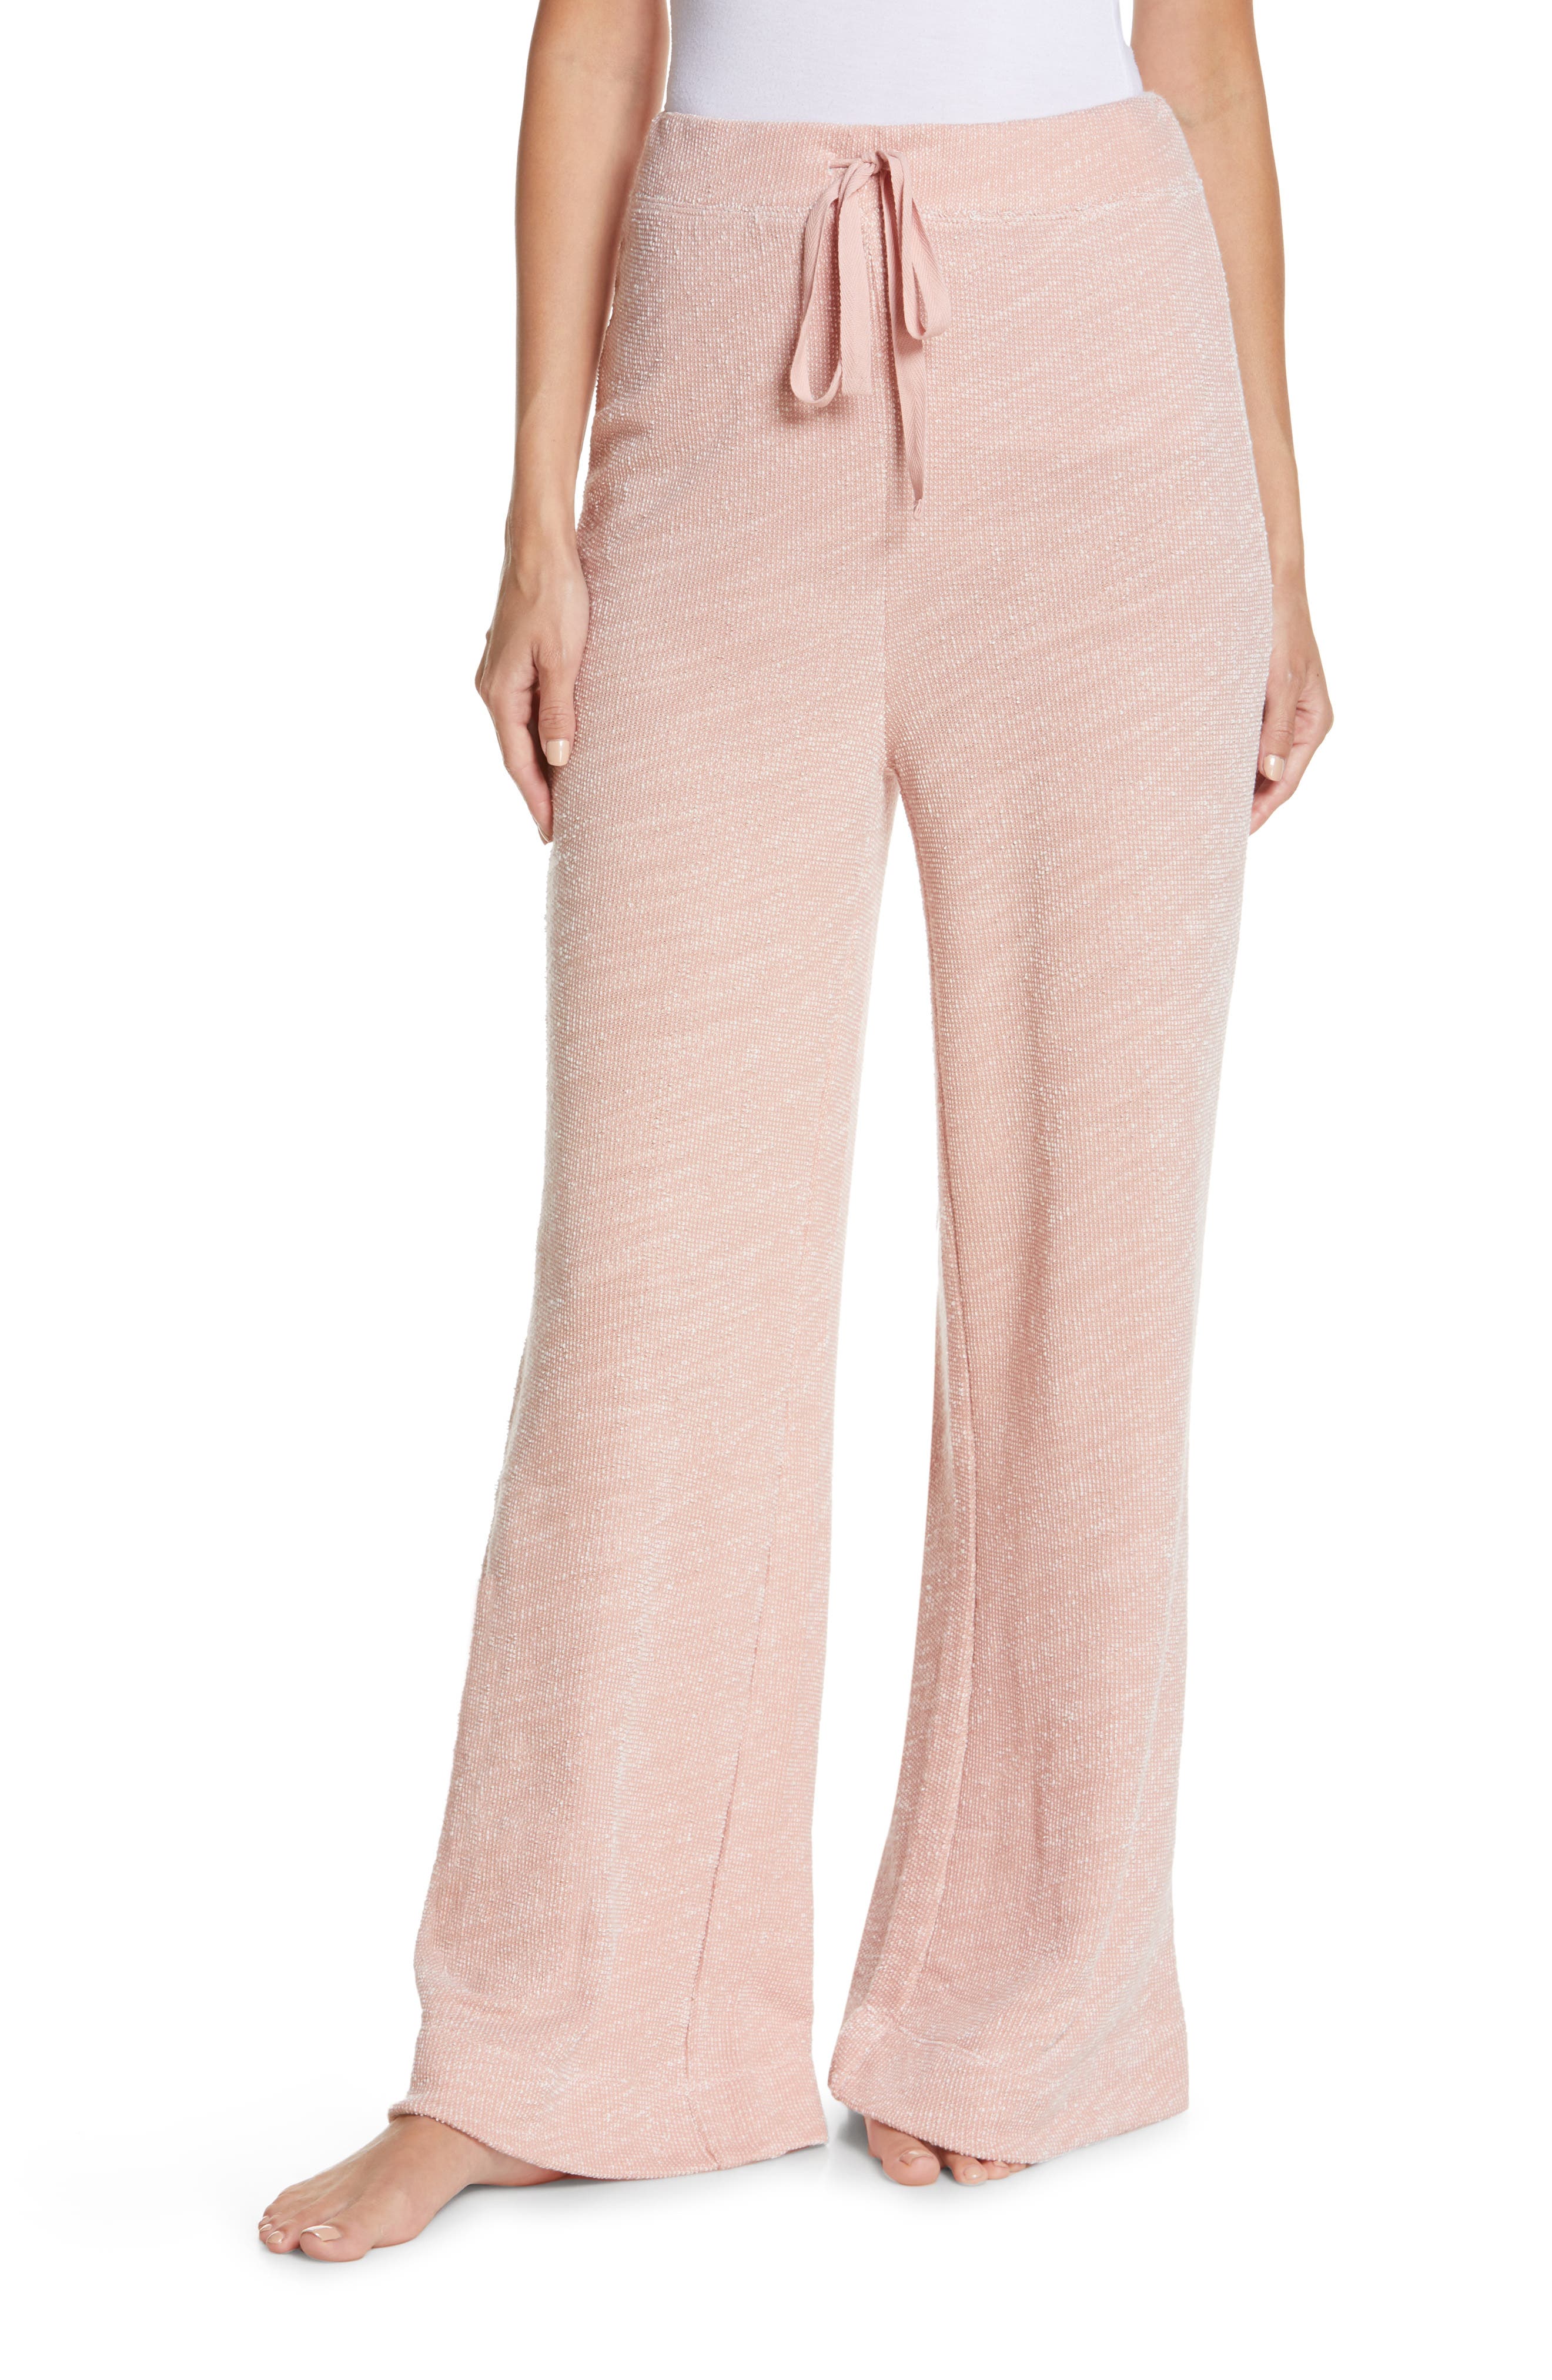 Honeydew Intimates Womens After Hours Lounge Pant 